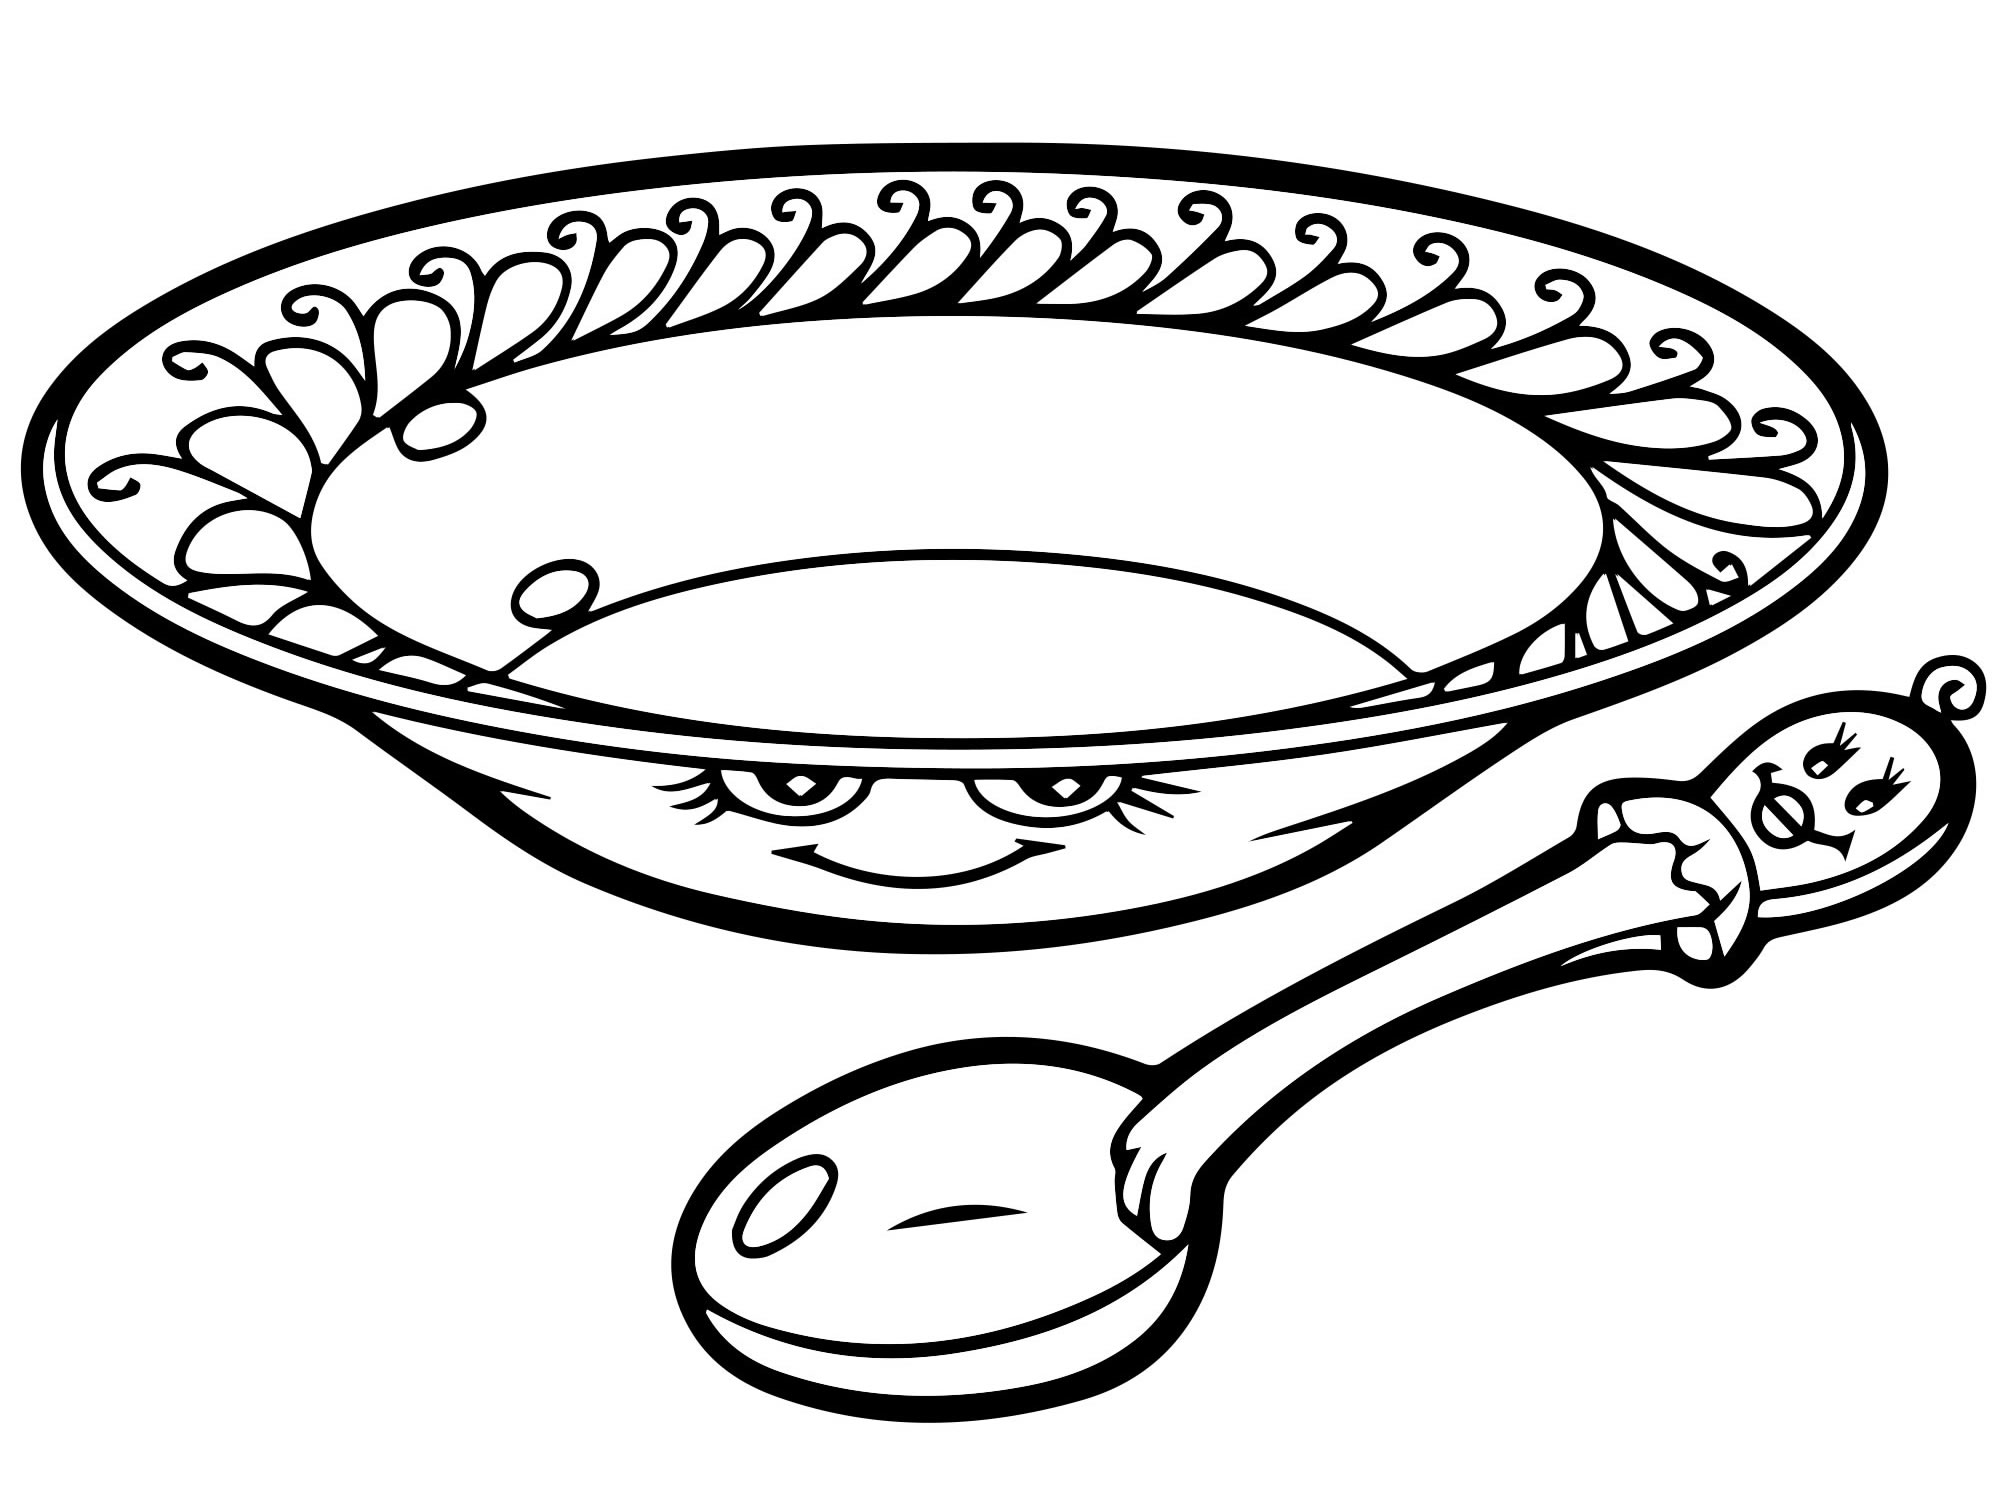 Vivacious bowl coloring page for beginners